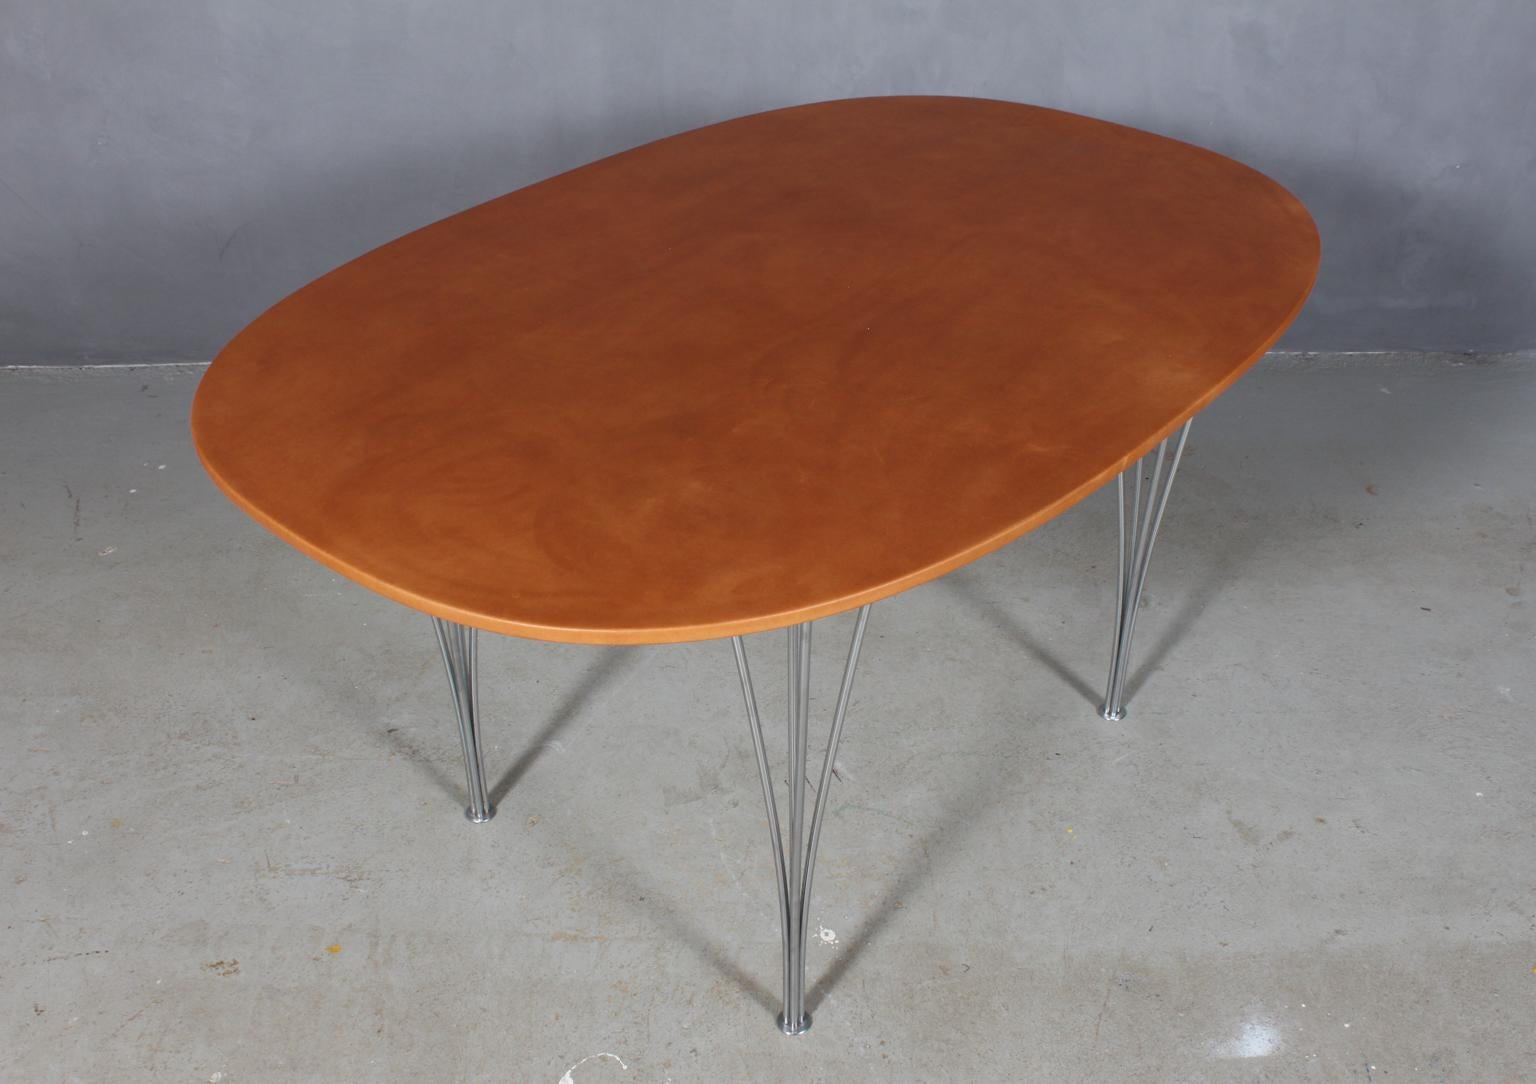 Piet Hein & Bruno Mathsson super ellipse dining table with new upholstered plate with cognac vintage aniline leather.

Spring legs of chrome.

Model 3513, made by Fritz Hansen.

The leather upholstery gives a unique and strong surface which